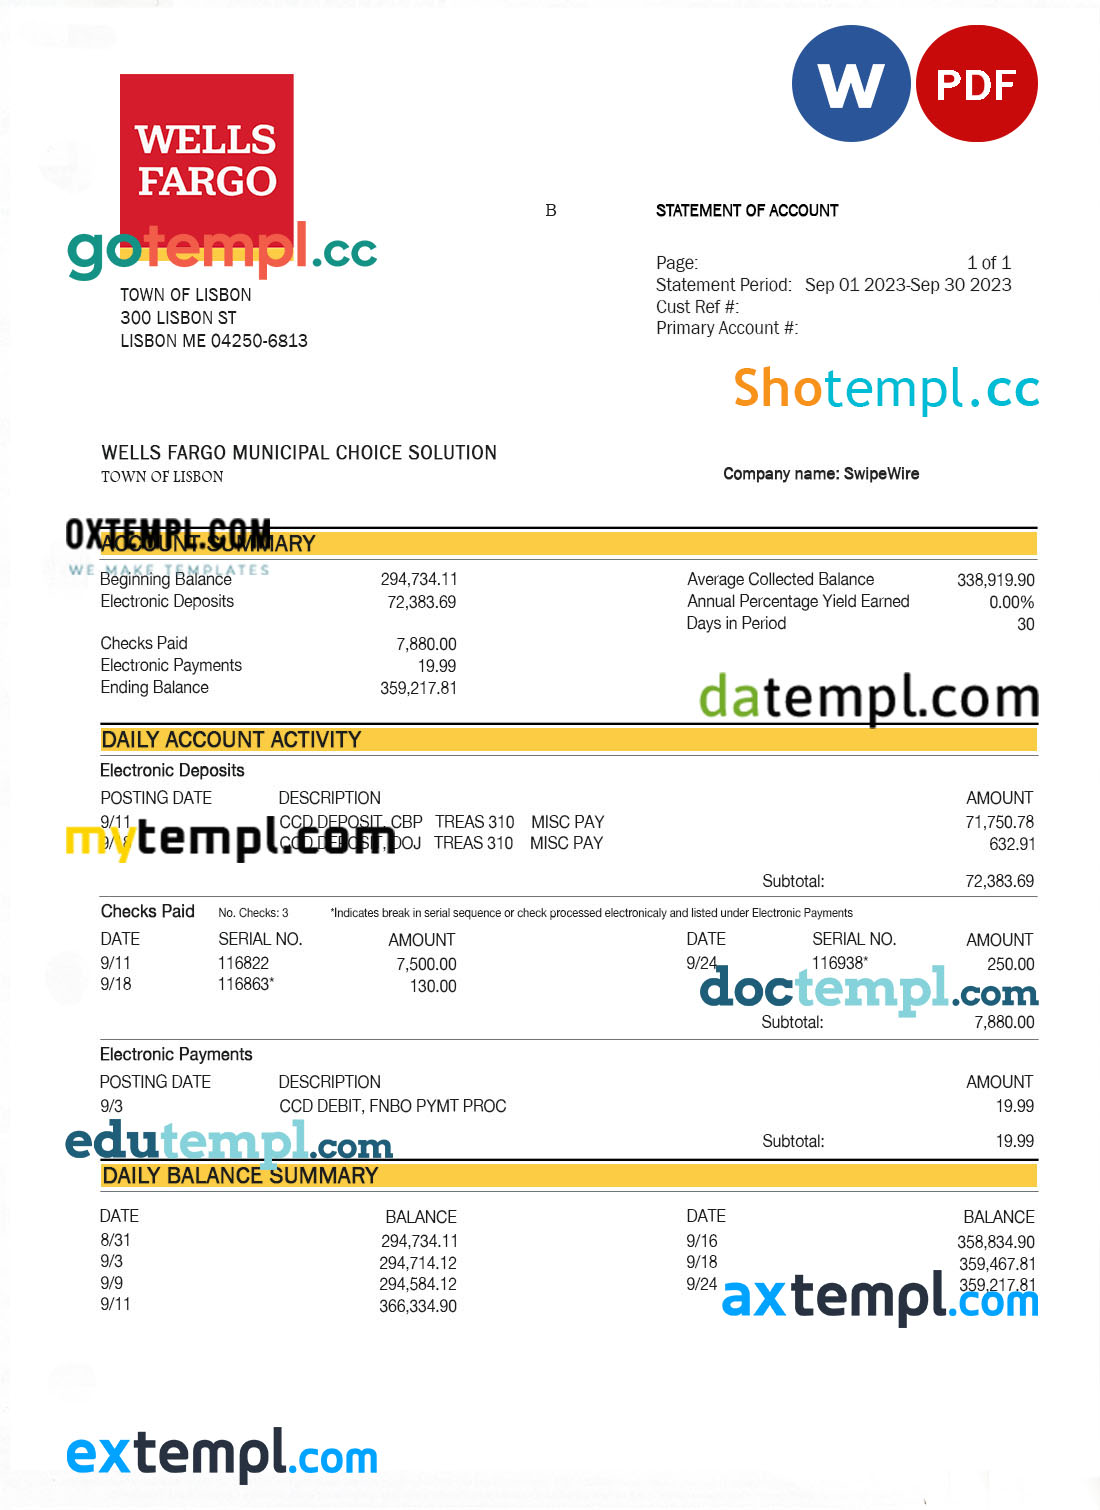 Wells Fargo firm bank statement Word and PDF template